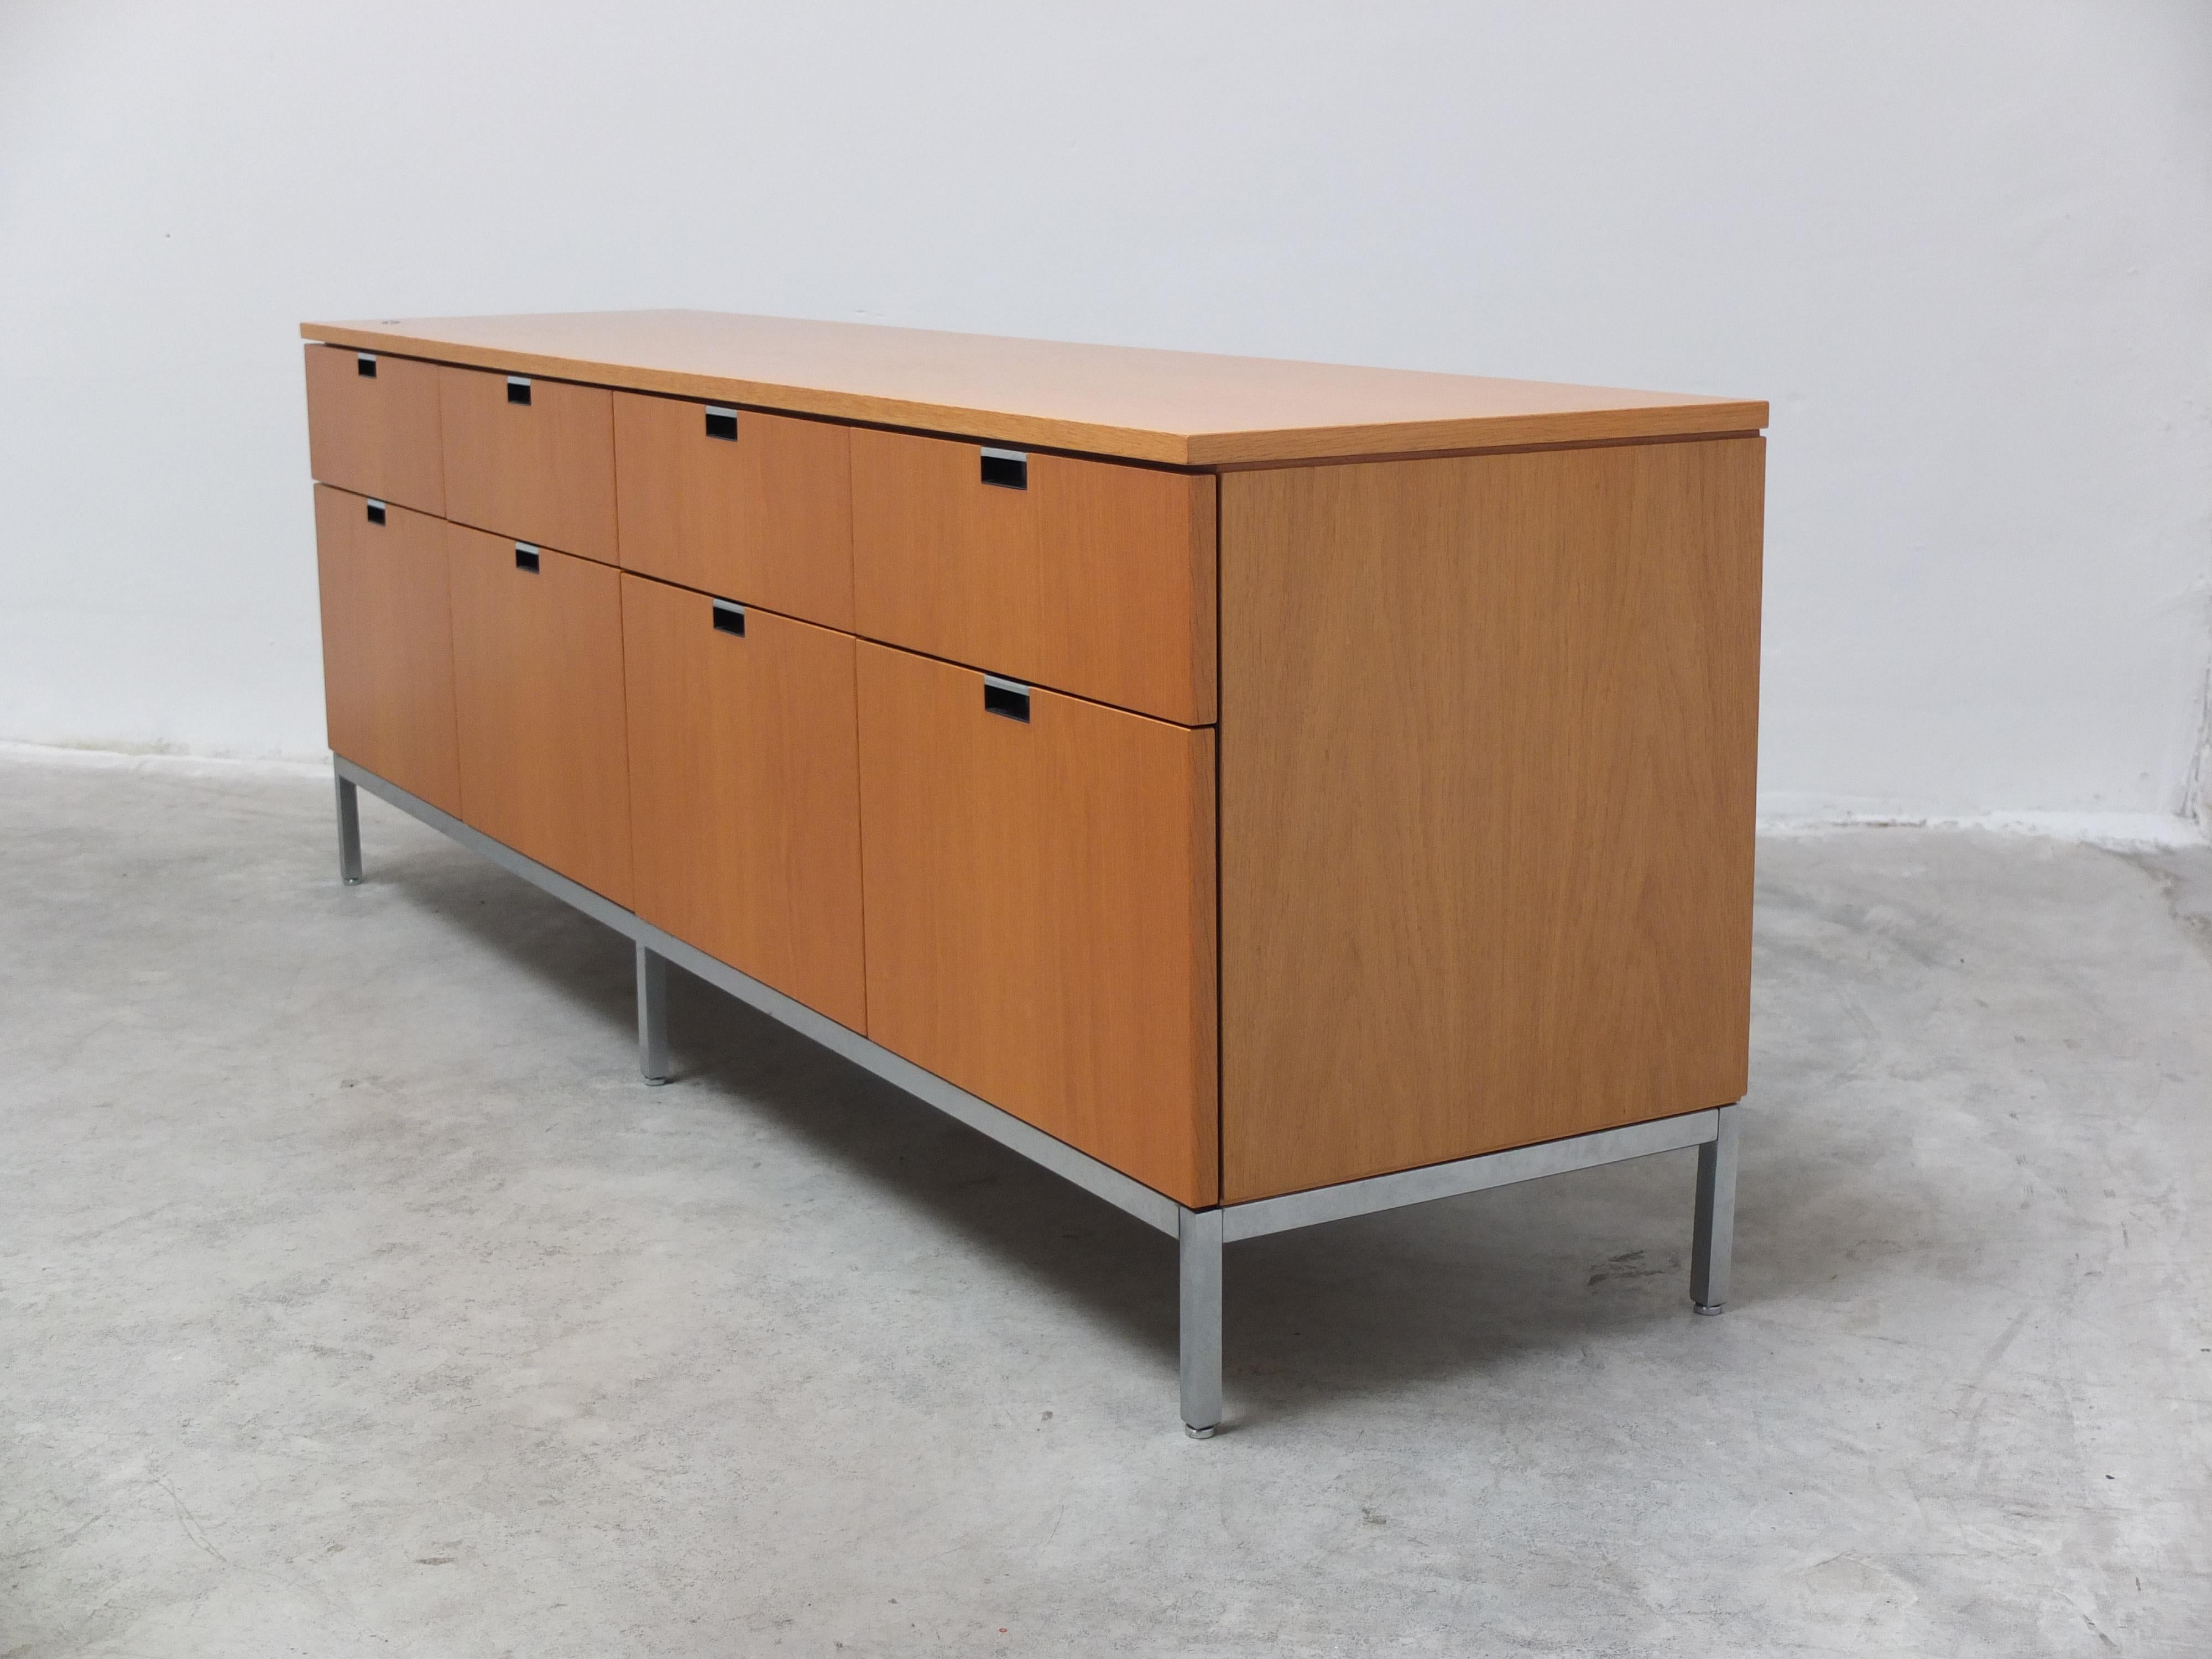 20th Century Freestanding 8-Drawer Credenza by Florence Knoll for Knoll, 1961